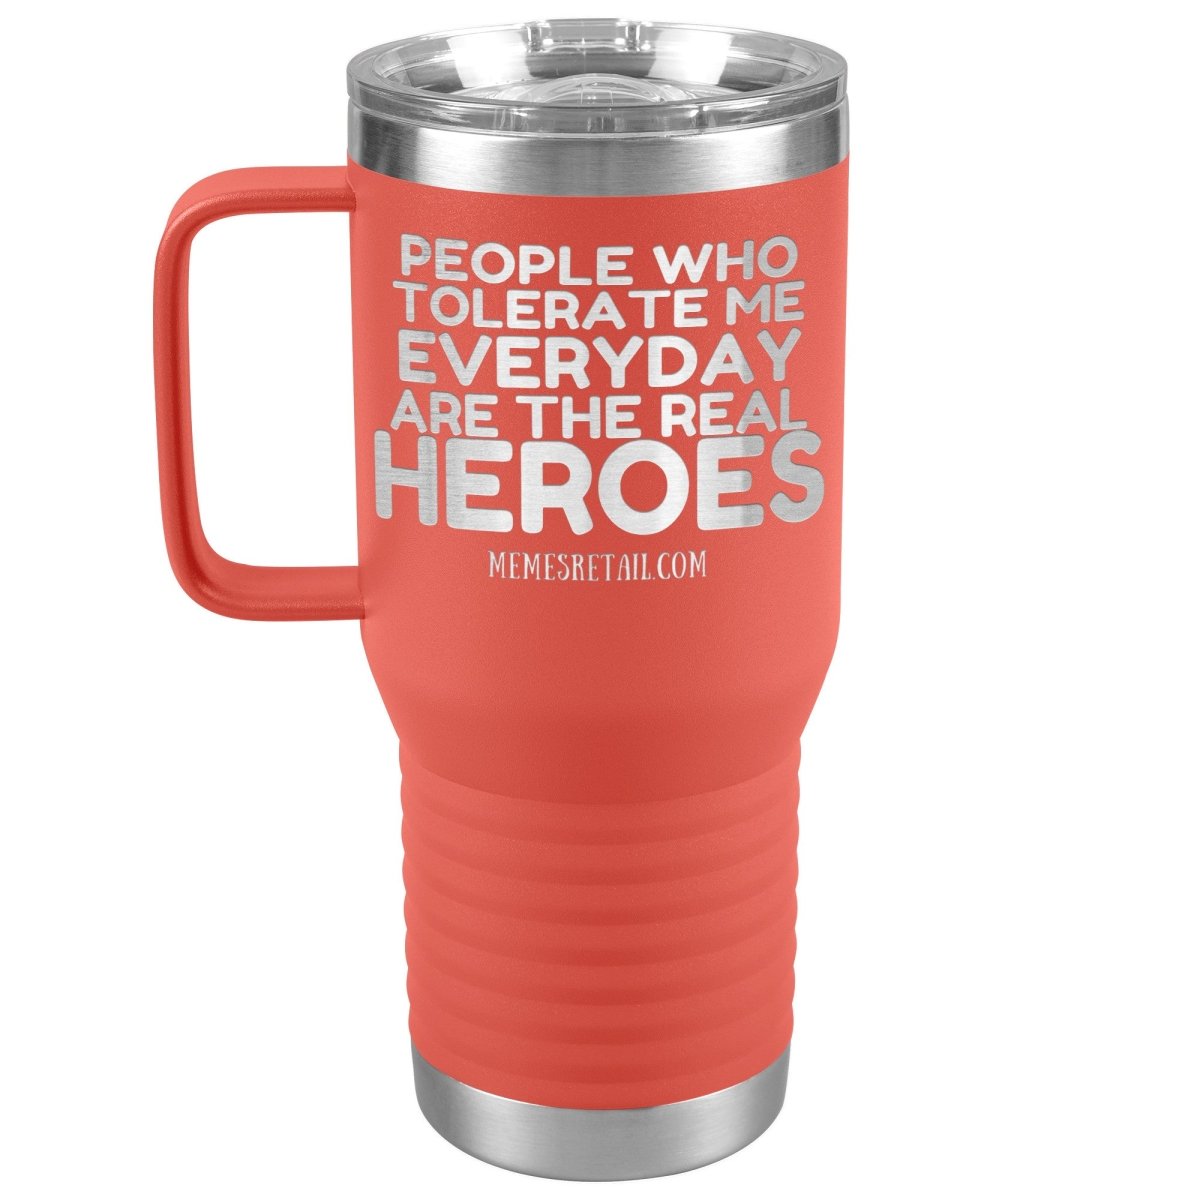 People Who Tolerate Me Everyday Are The Real Heroes Tumblers, 20oz Travel Tumbler / Coral - MemesRetail.com